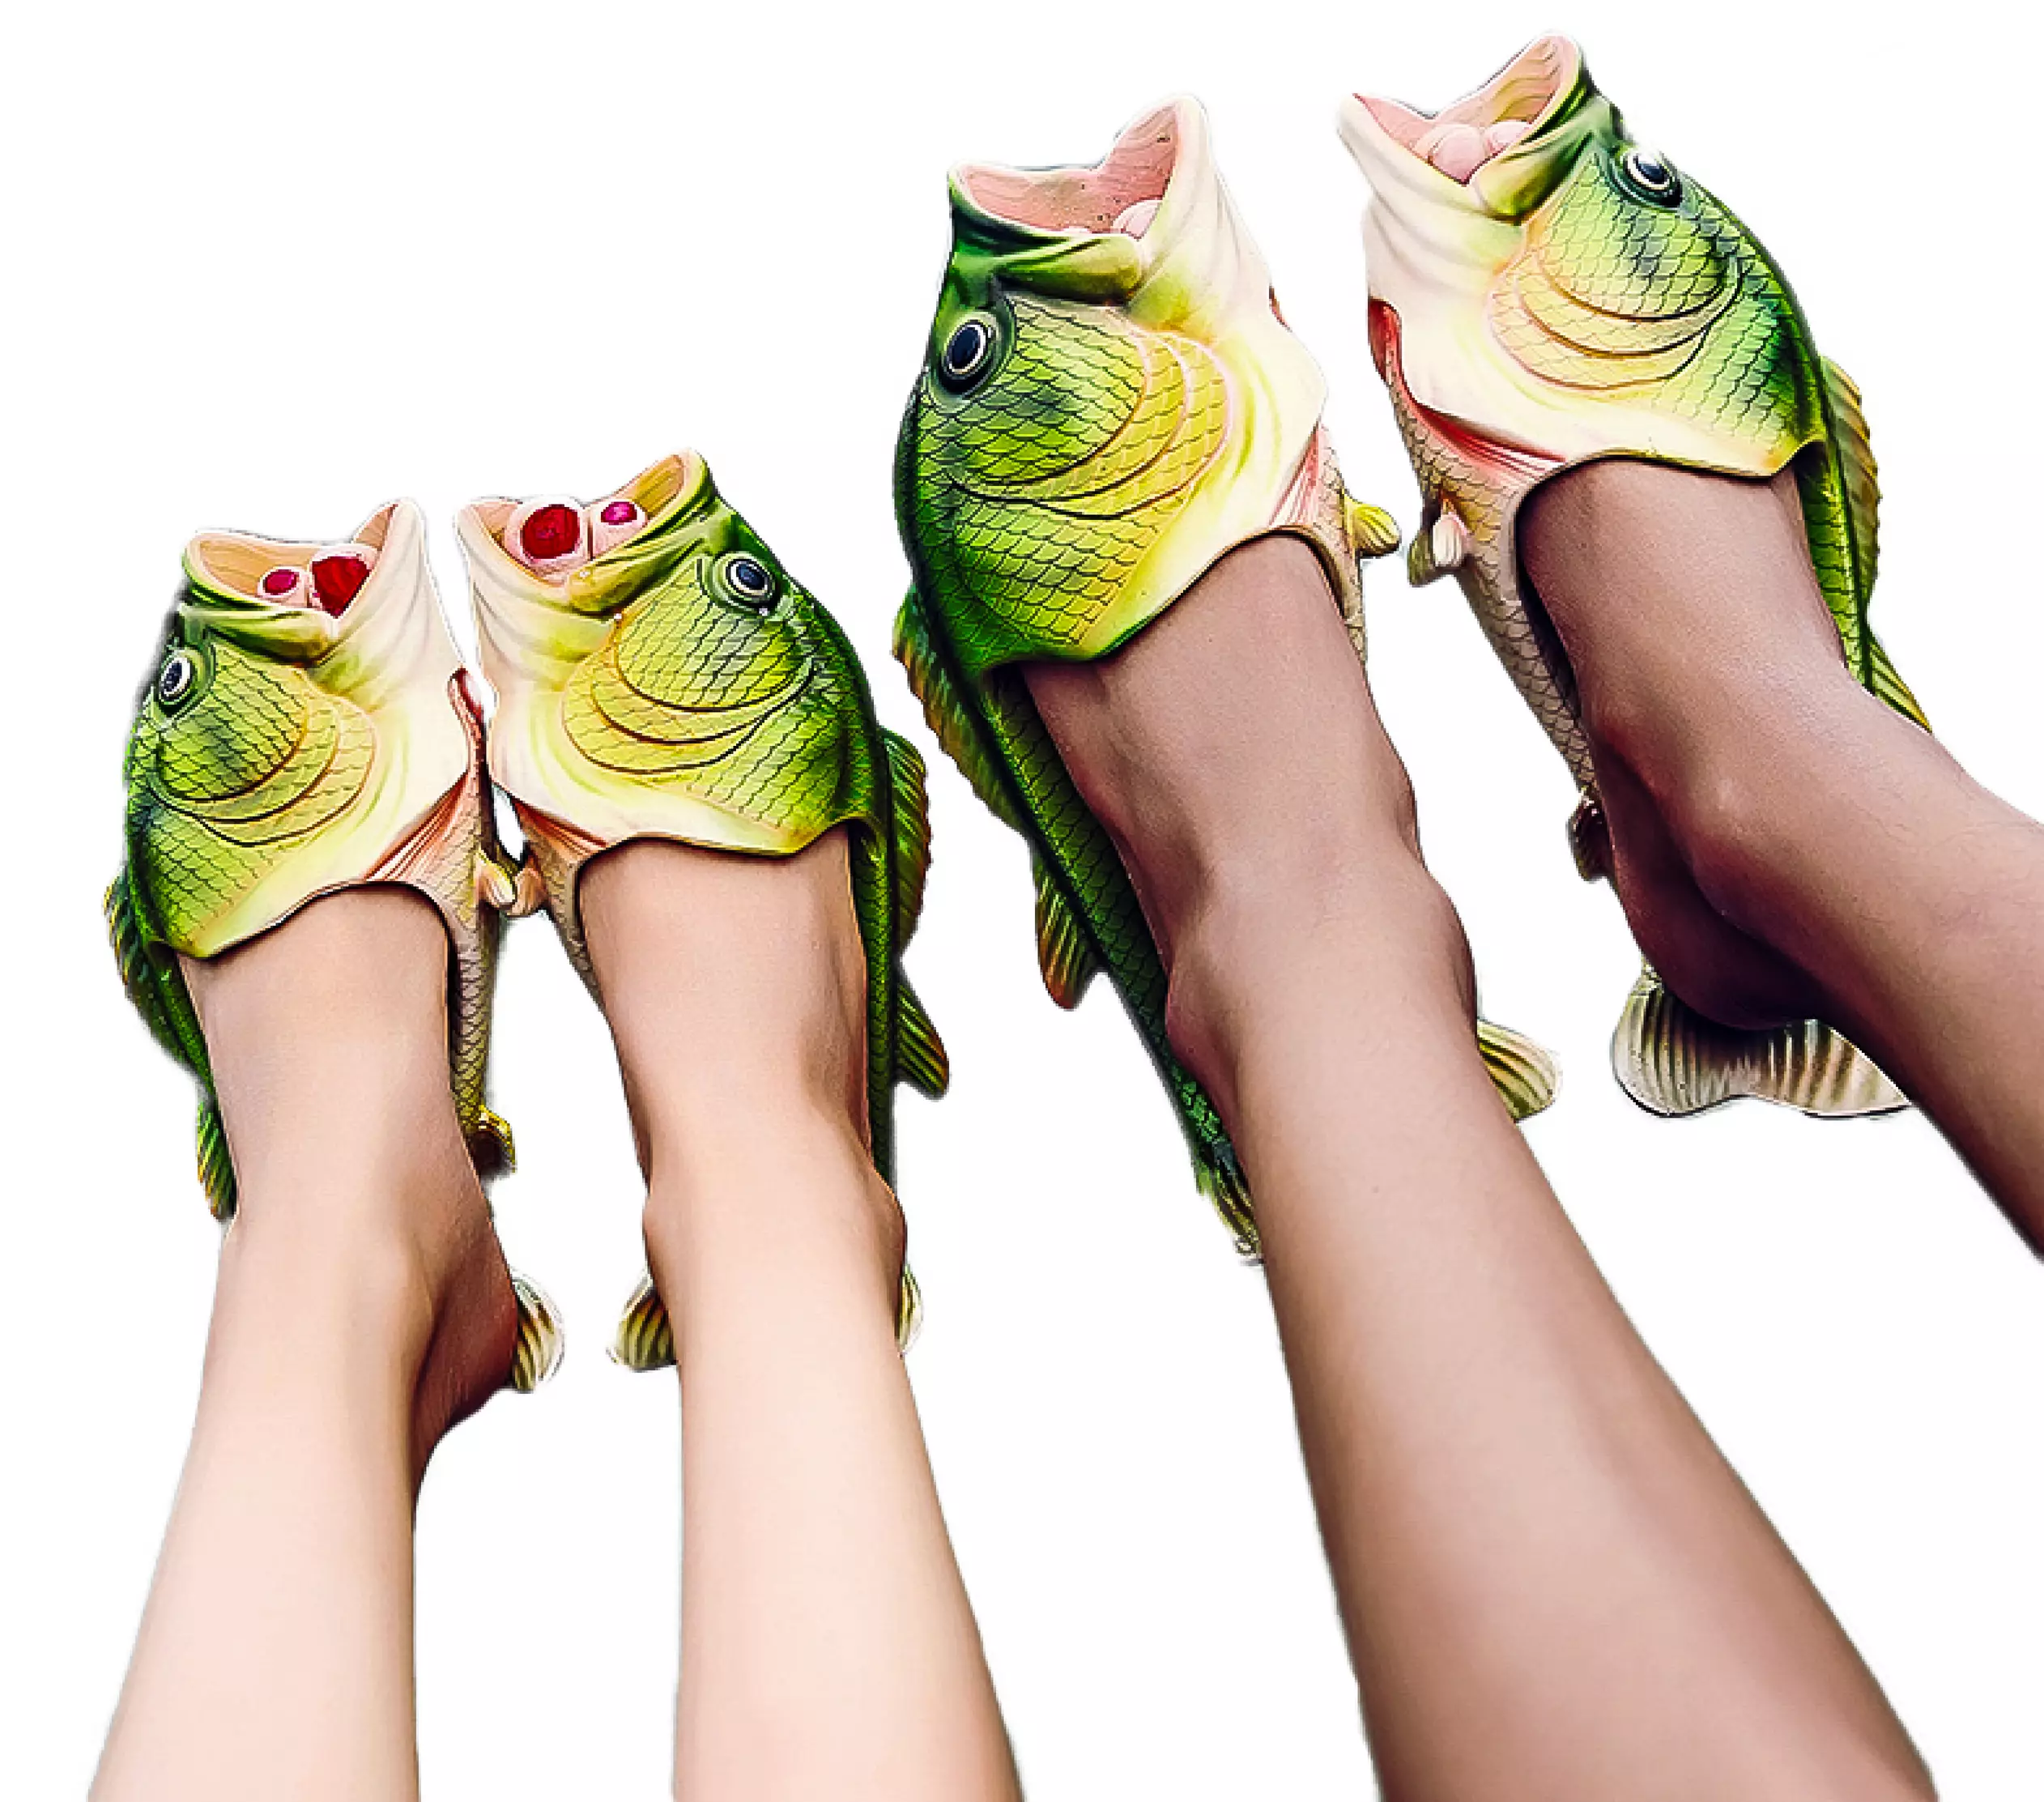 Don't be a codfish, up your footwear game this season. (